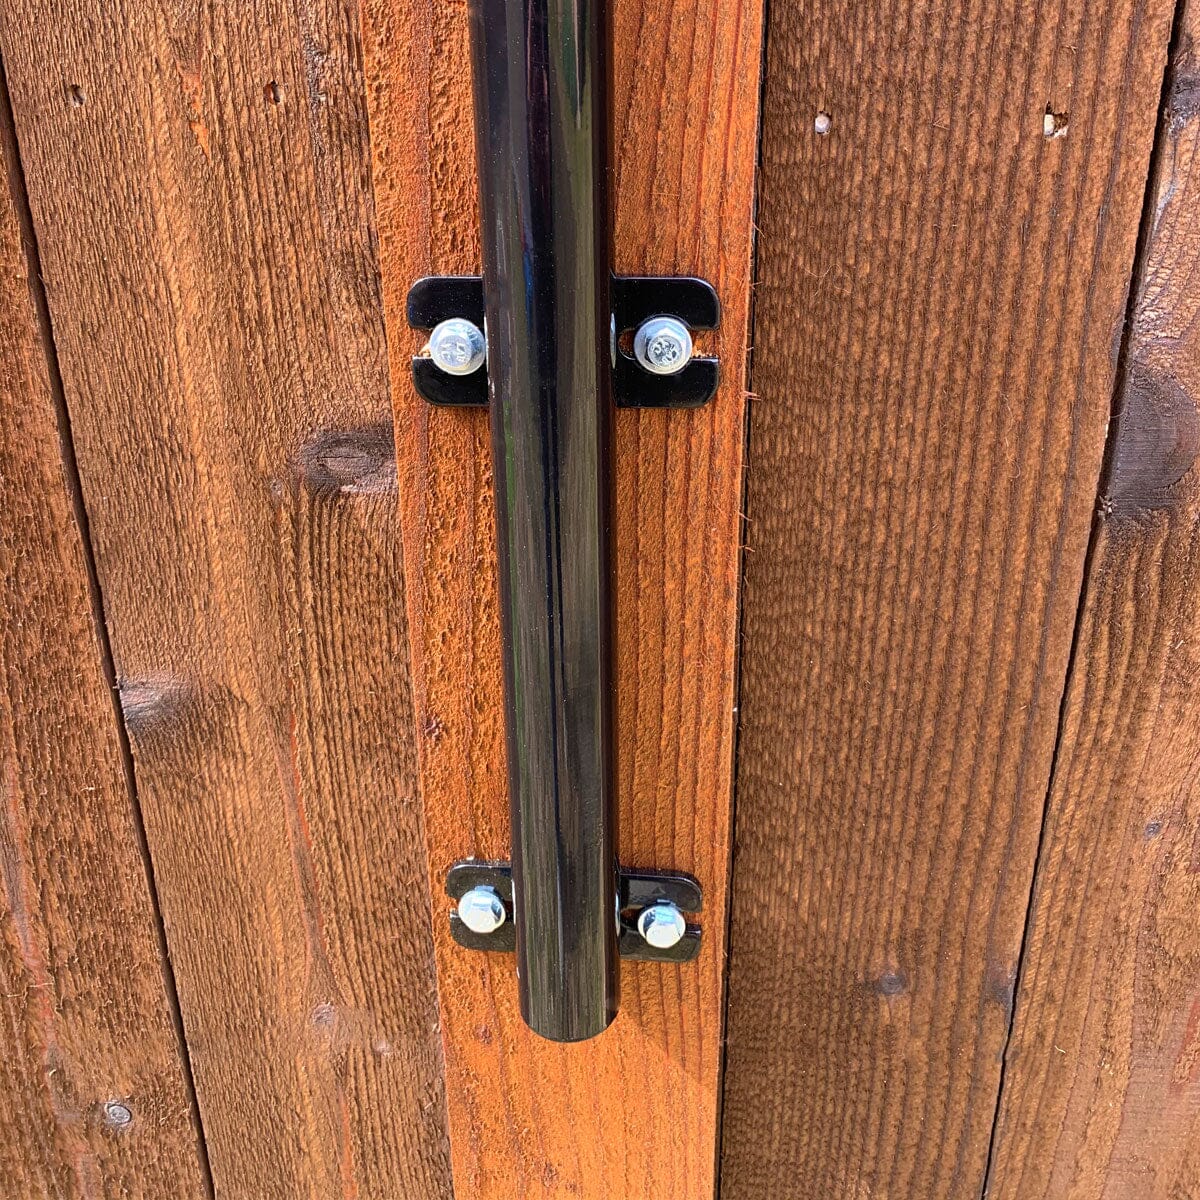 Close-up of the holding bracket for dog fences by Dog Proofer, emphasizes the sturdy construction and finish.